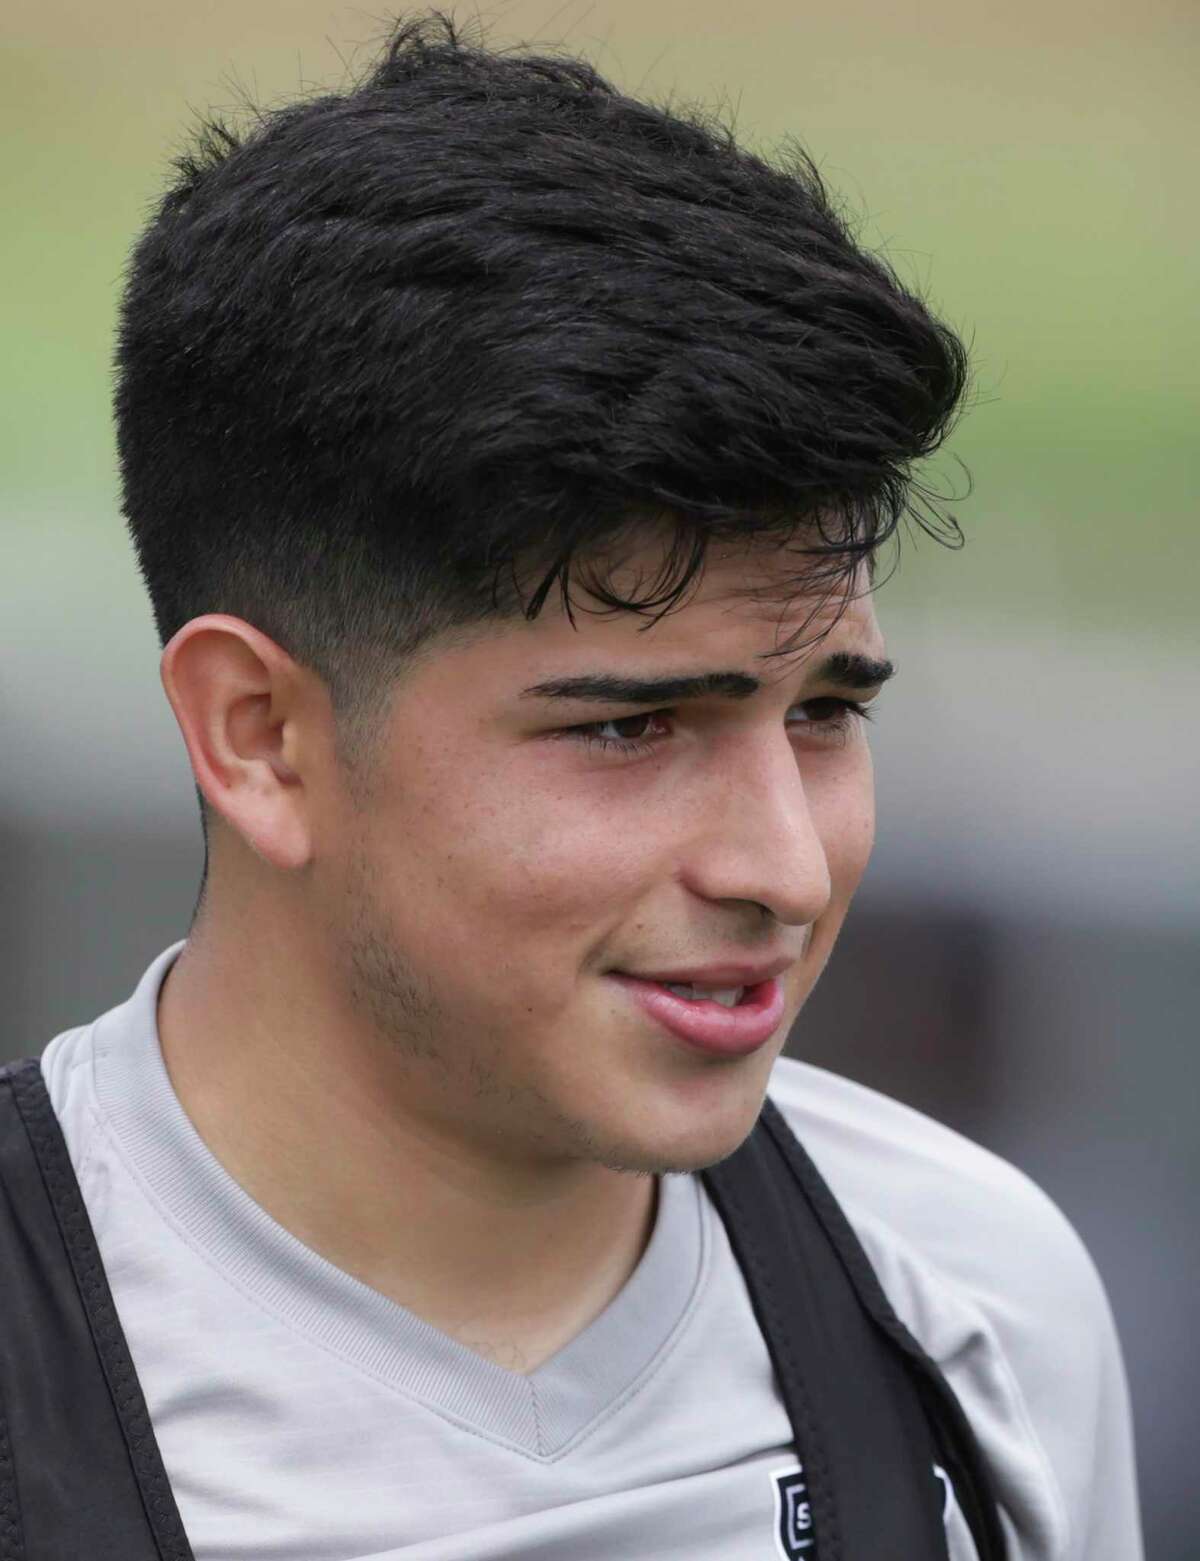 Jose Gallegos practices with San Antonio FC at the Star Soccer Complex on Feb. 4, 2020.